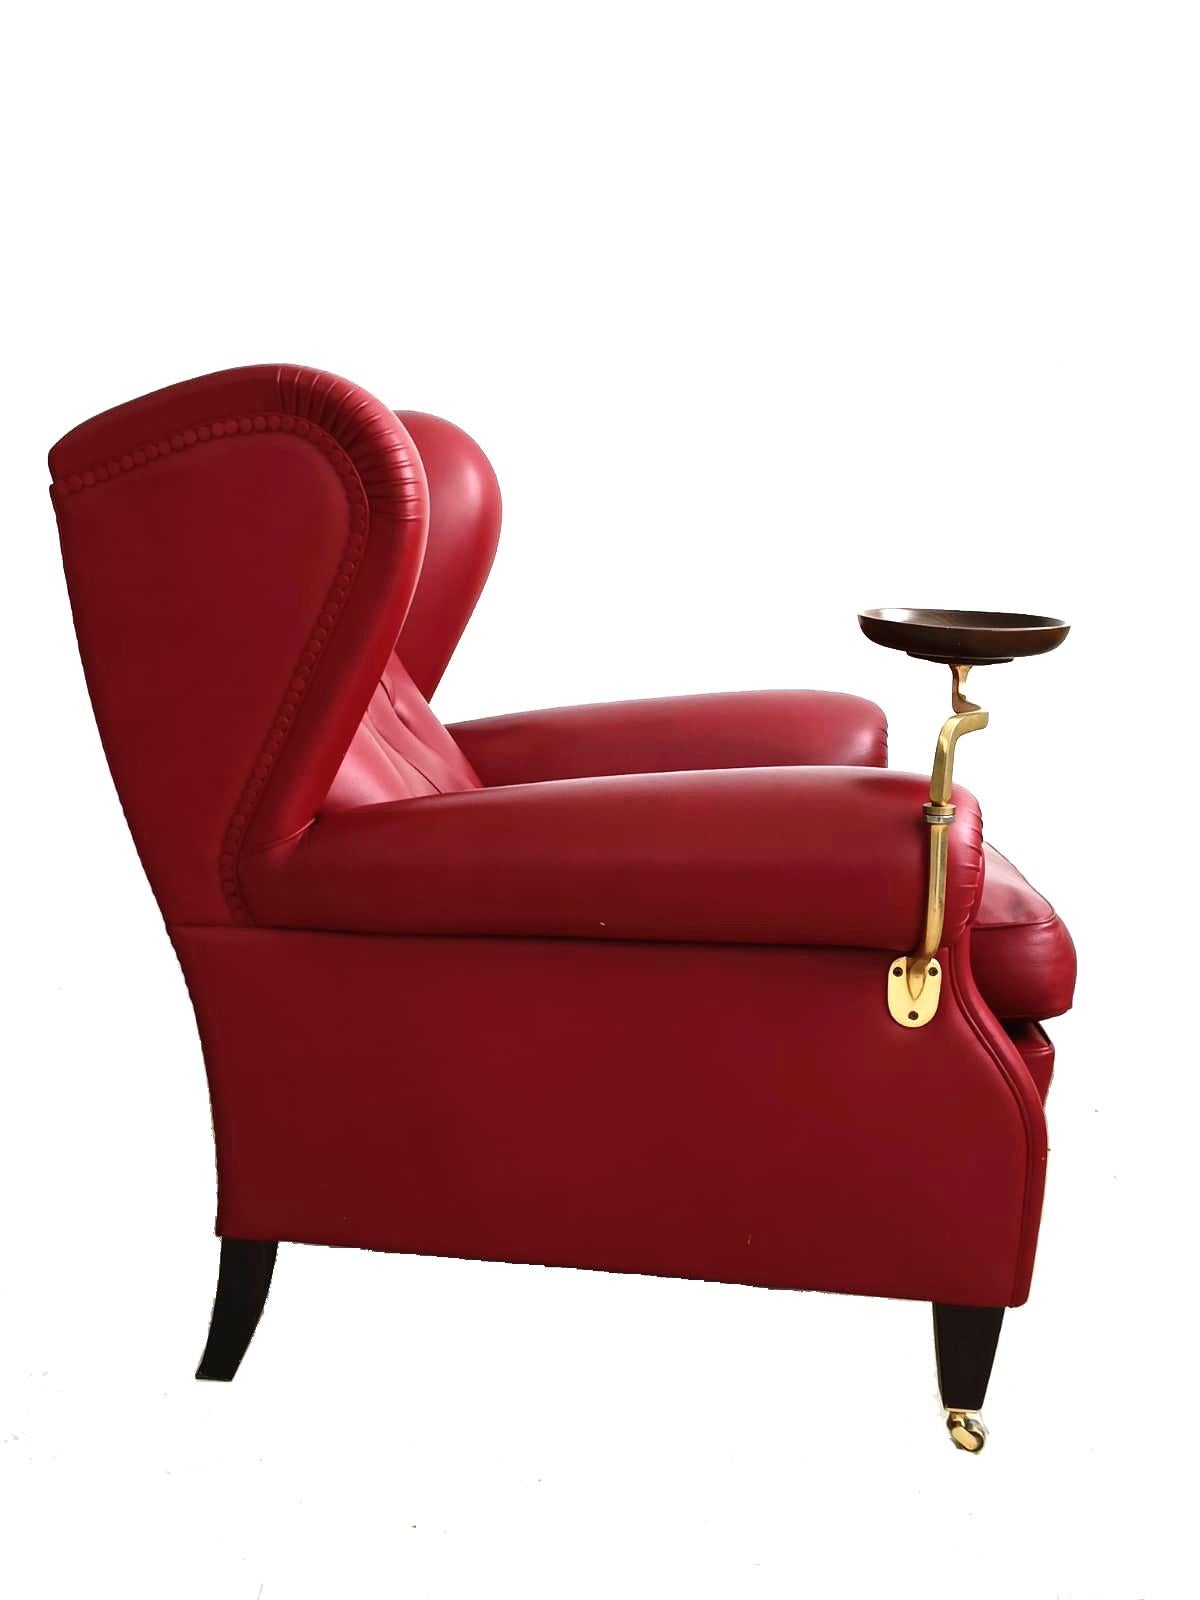 1919 Armchair Bergere Model in Century Leather Red Colour with Ashtray 7